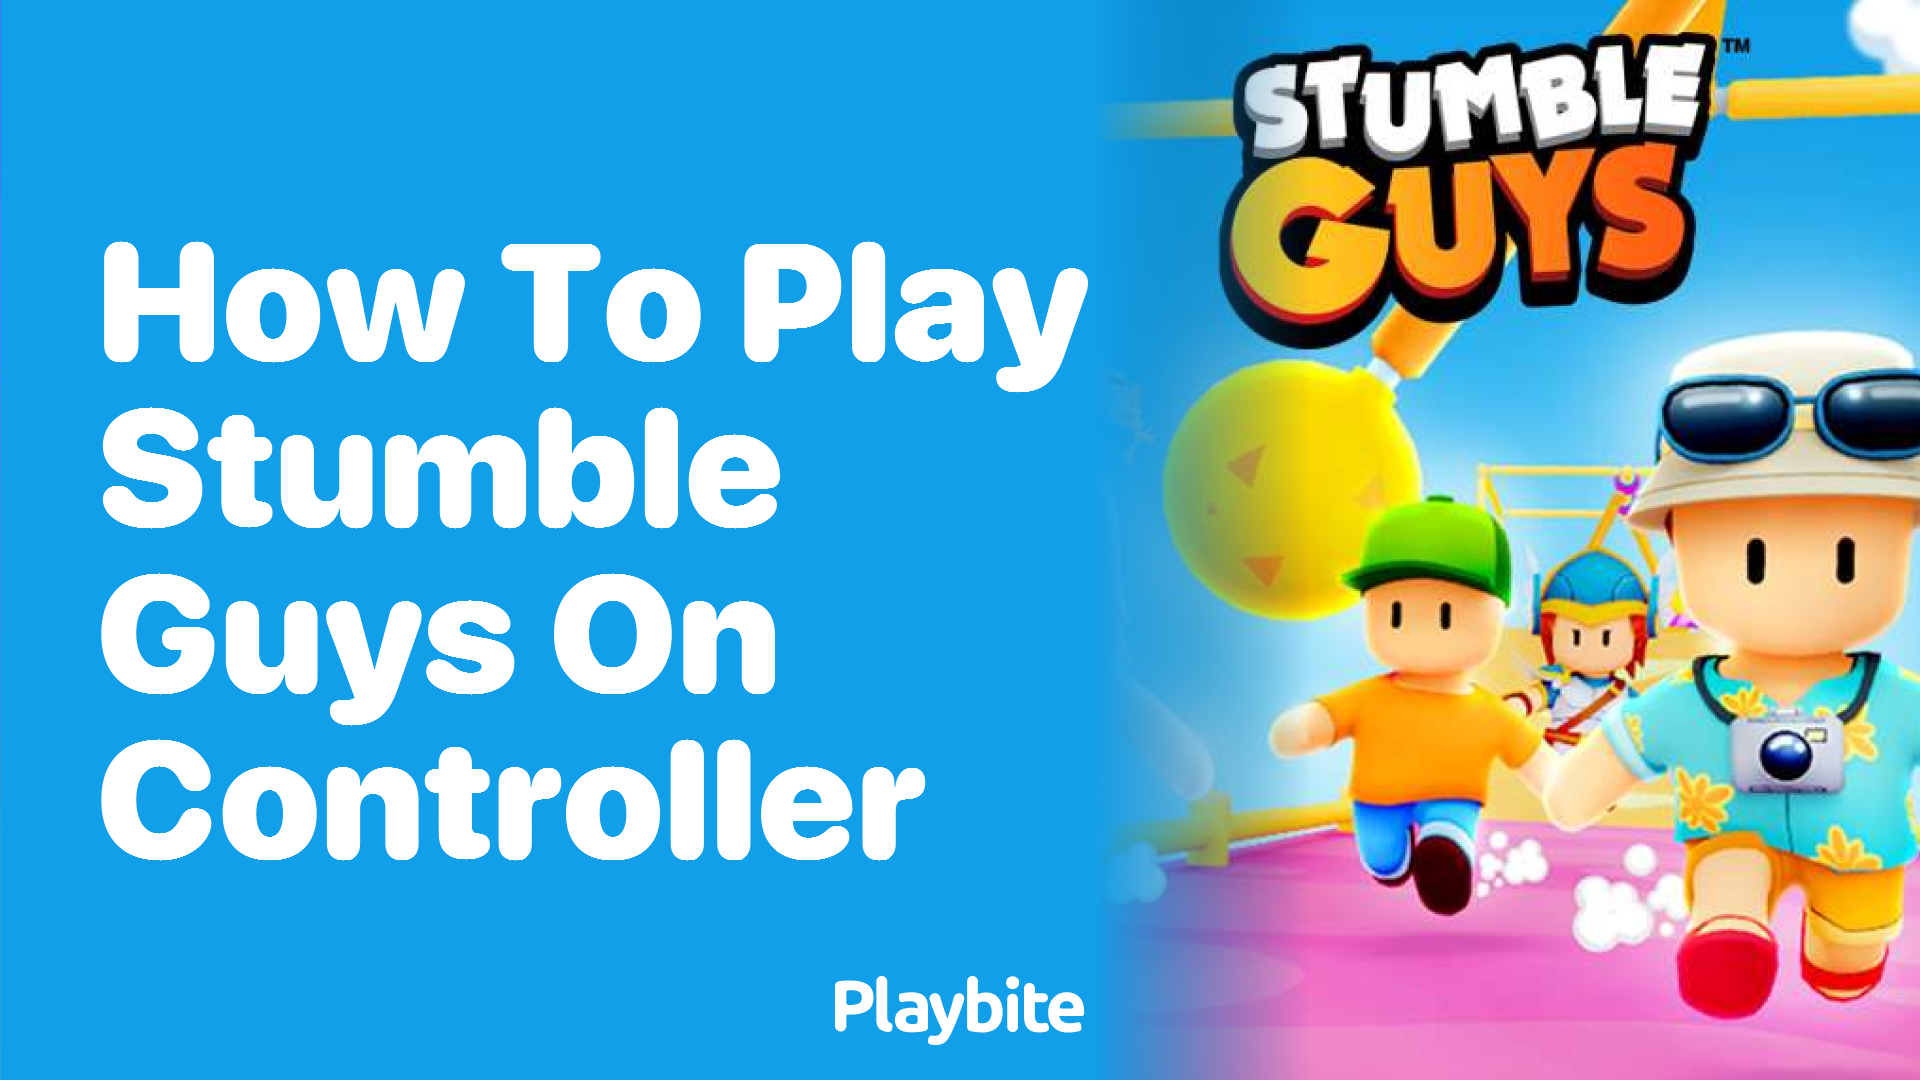 How to Play Stumble Guys on a Controller: A Fun Guide